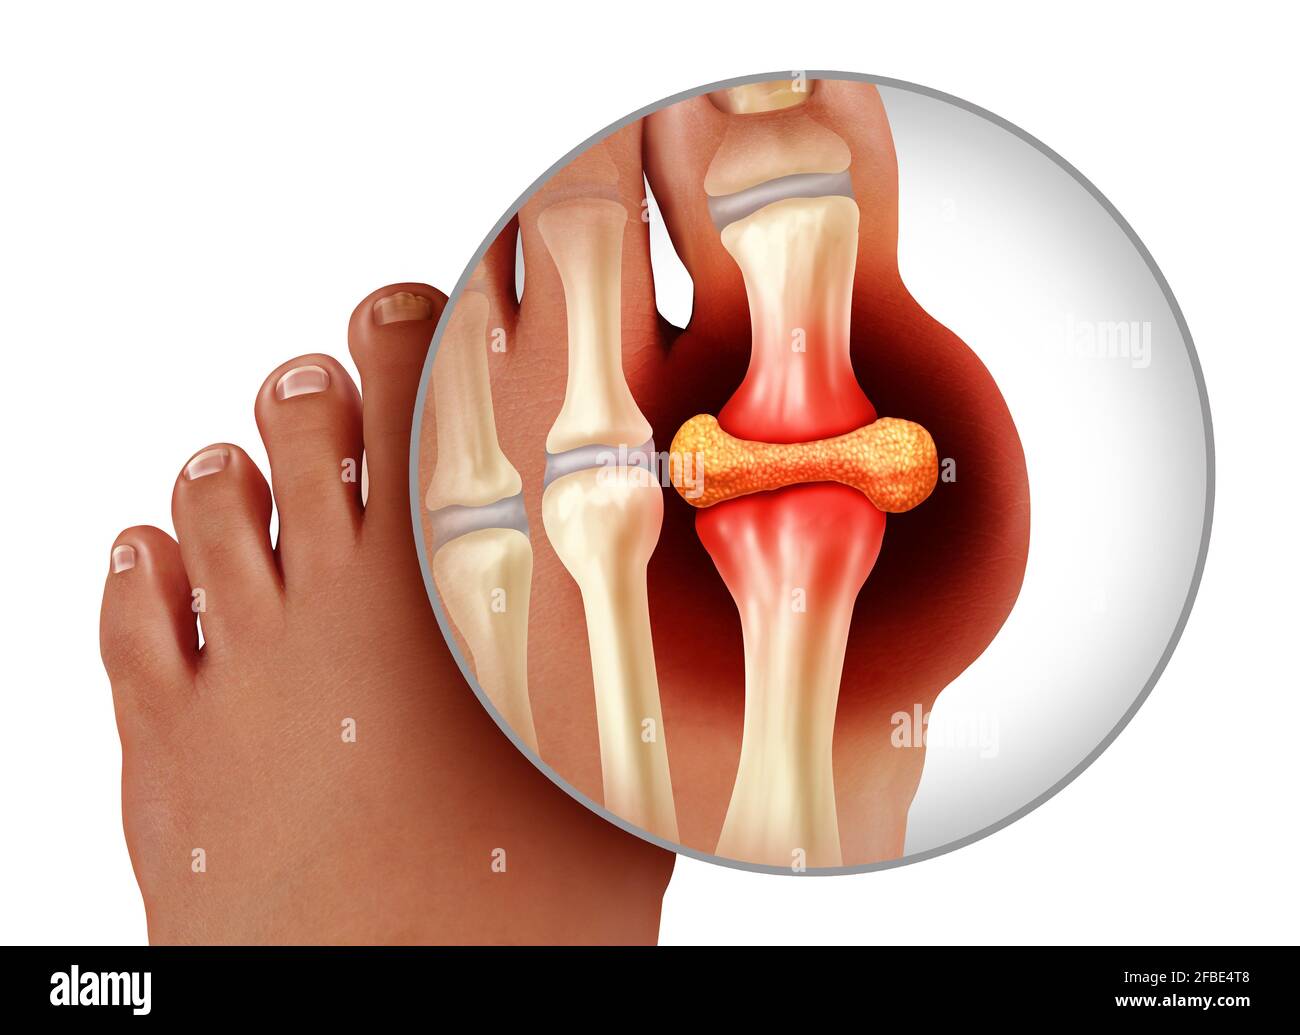 Foot gout and painful feet arthritis disease as toes close up with a human toe as a hyperuricemia symbol of treating and diagnosing chronic pain. Stock Photo